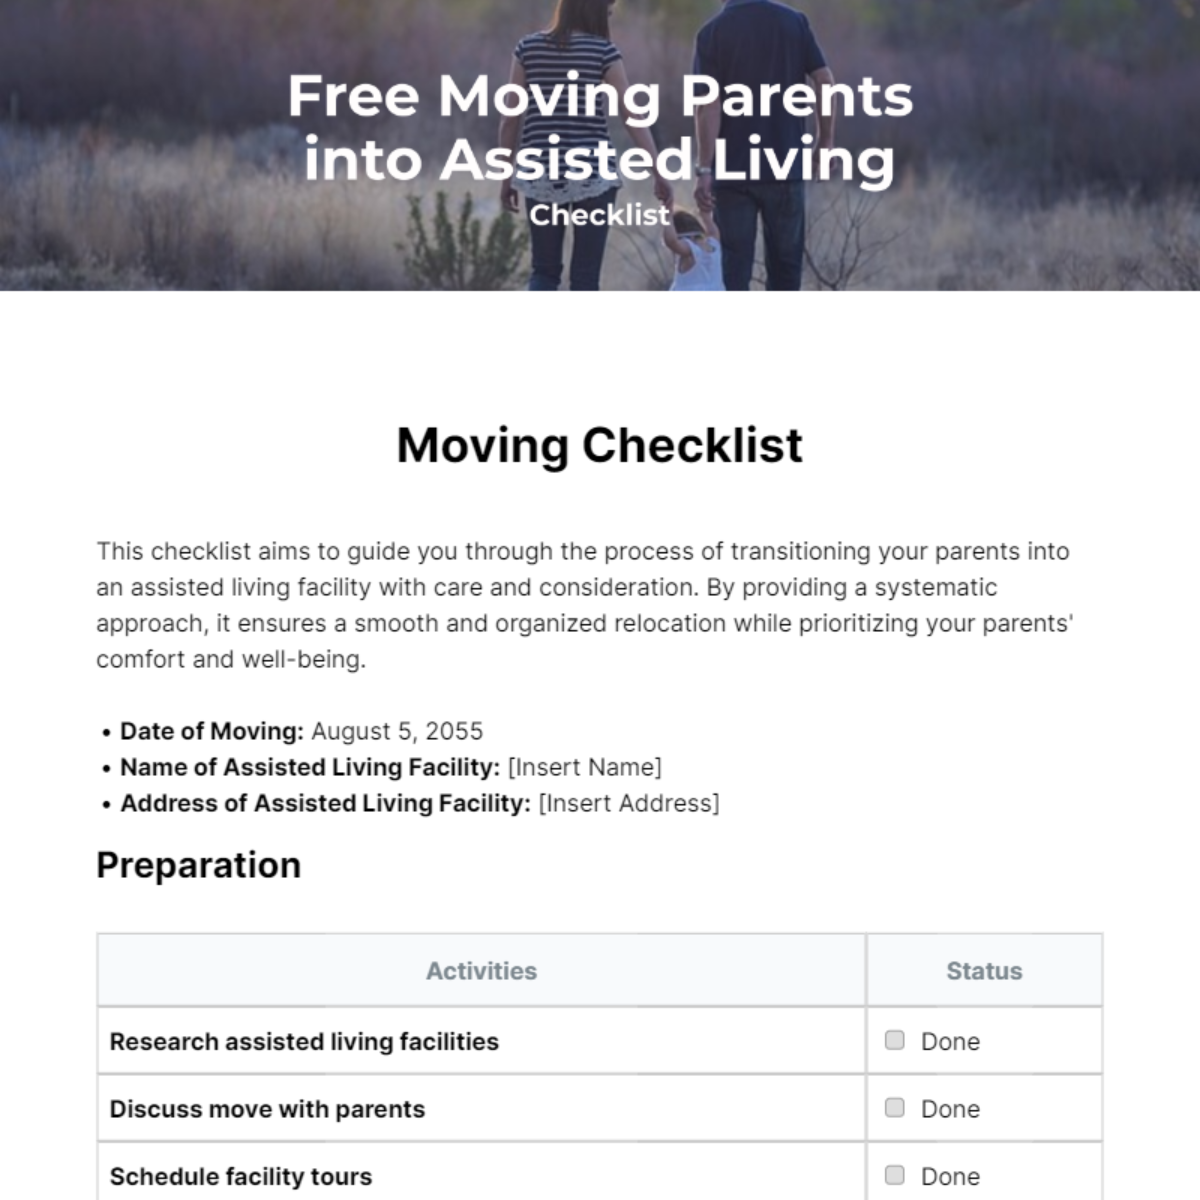 Moving Parents into Assisted Living Checklist Template